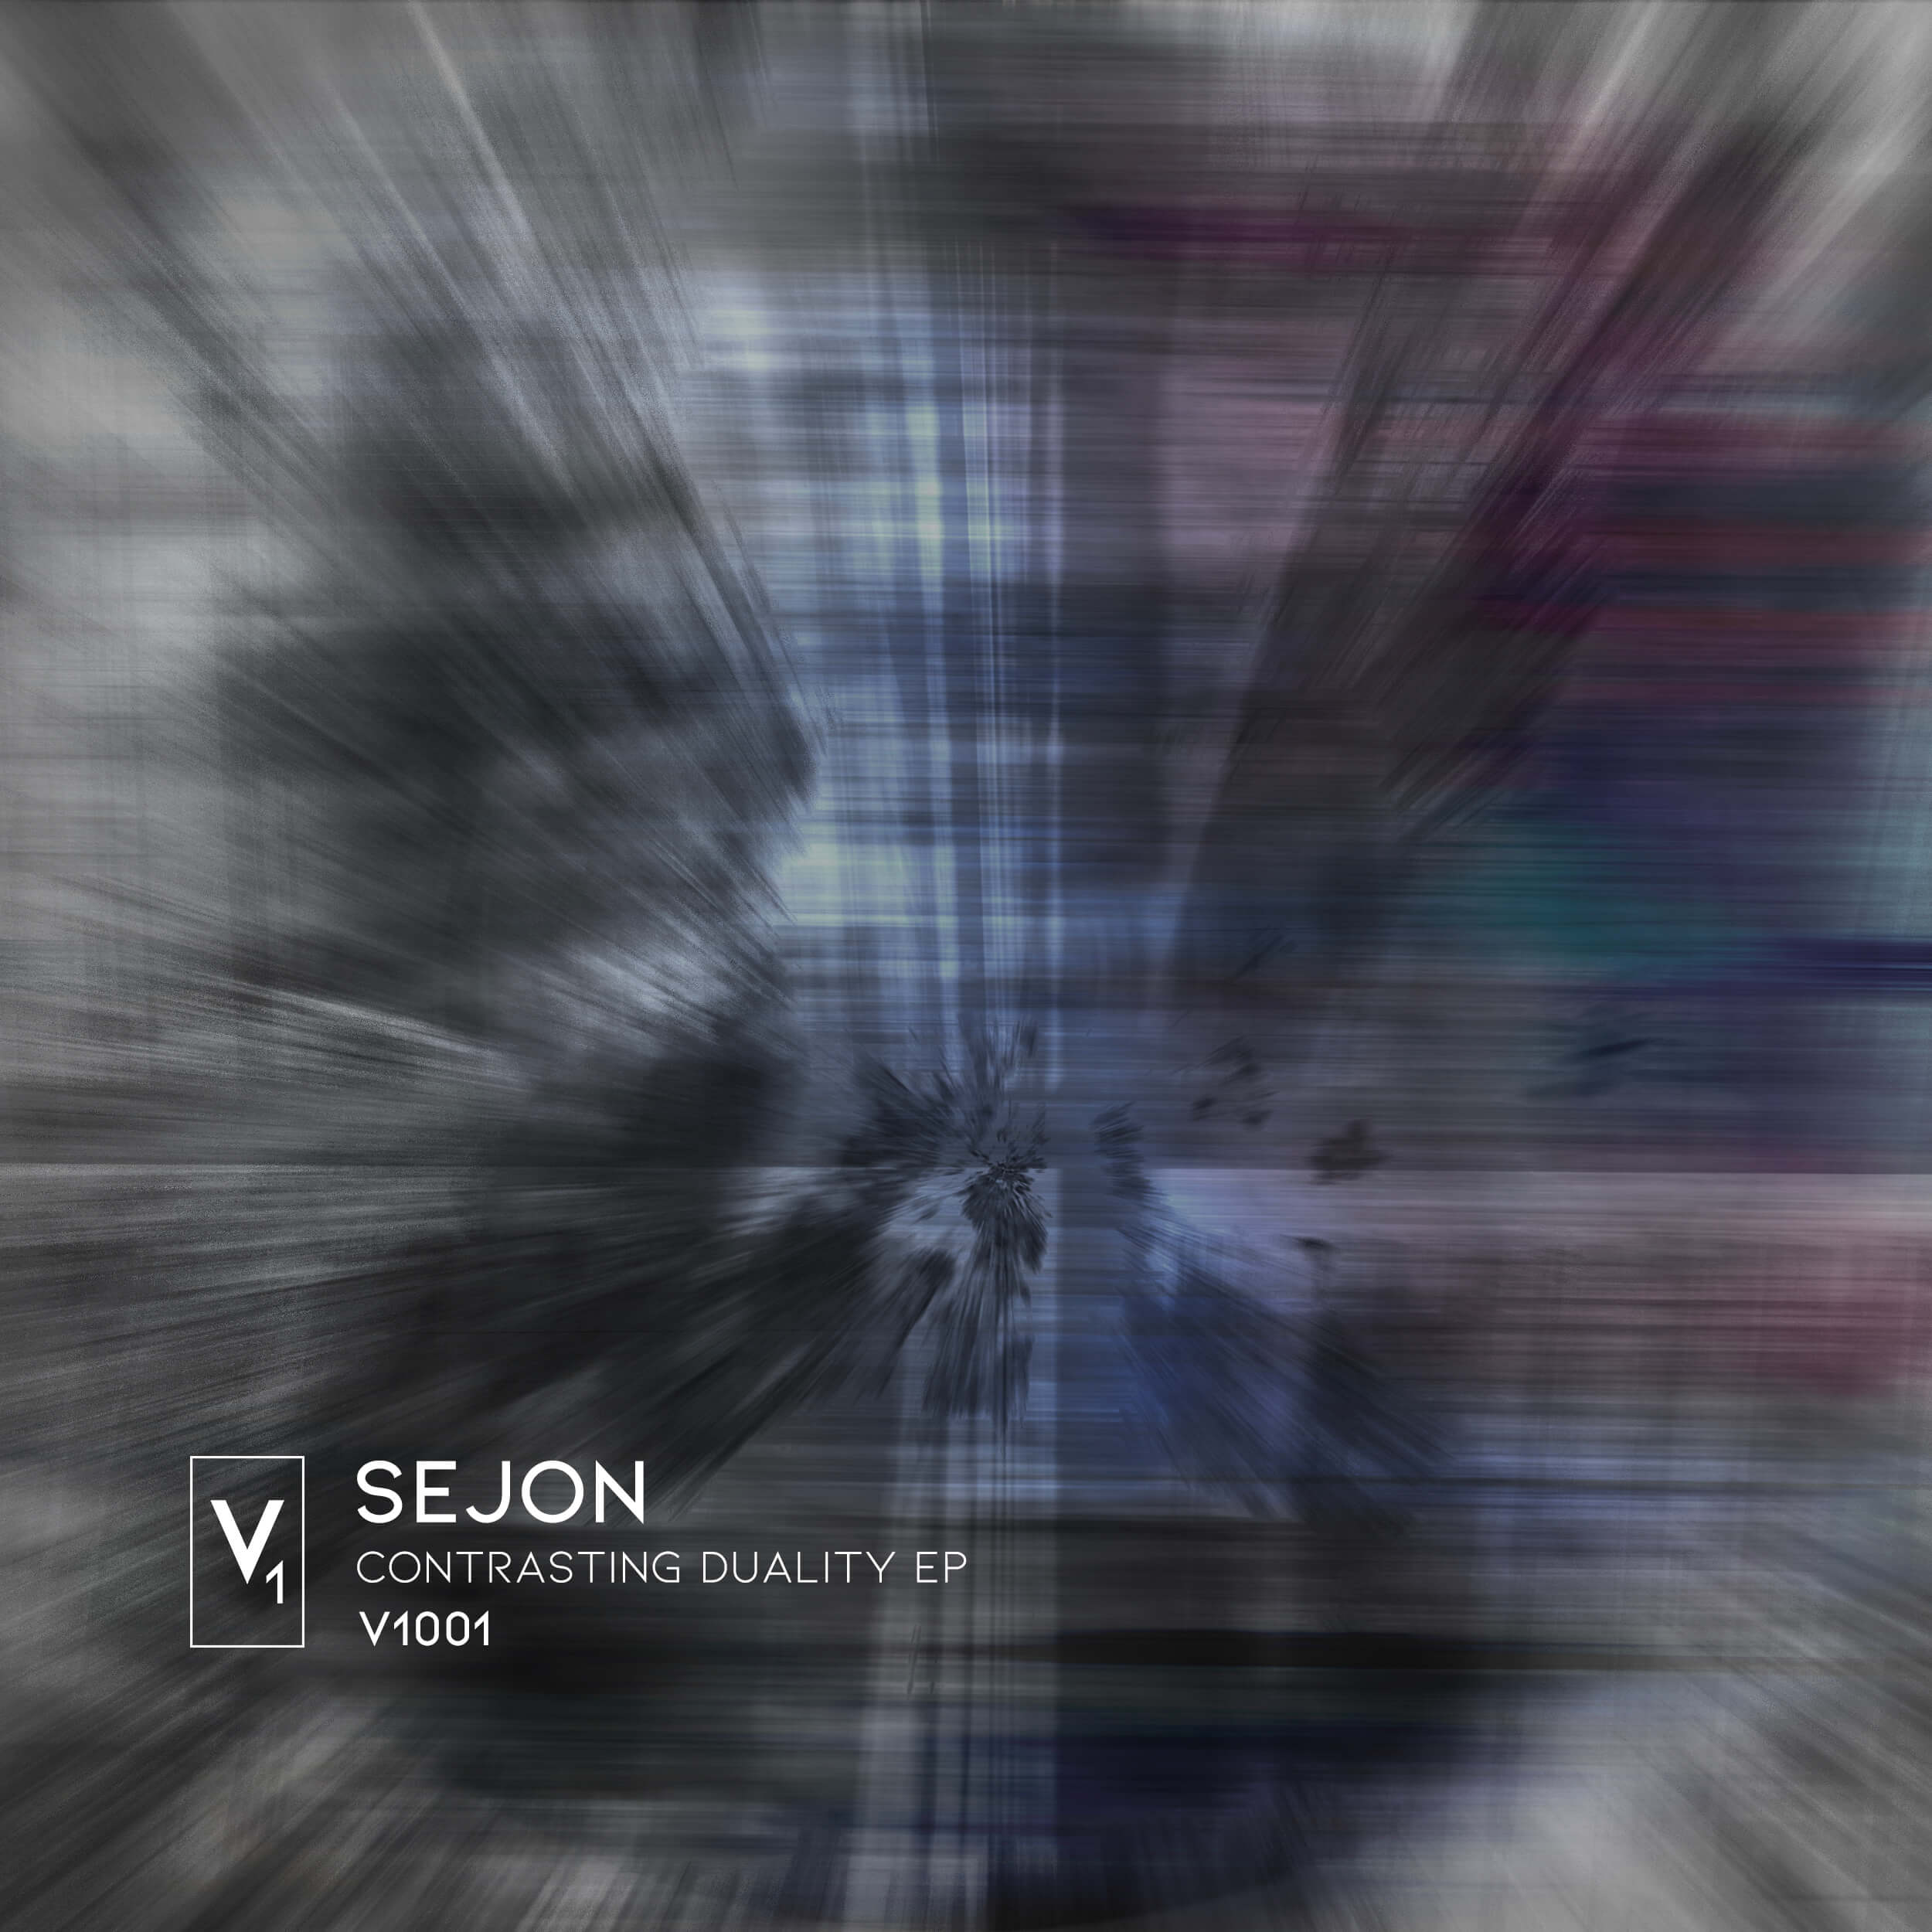 Sejon – Contrasting Duality EP [V1001] | Out Now!